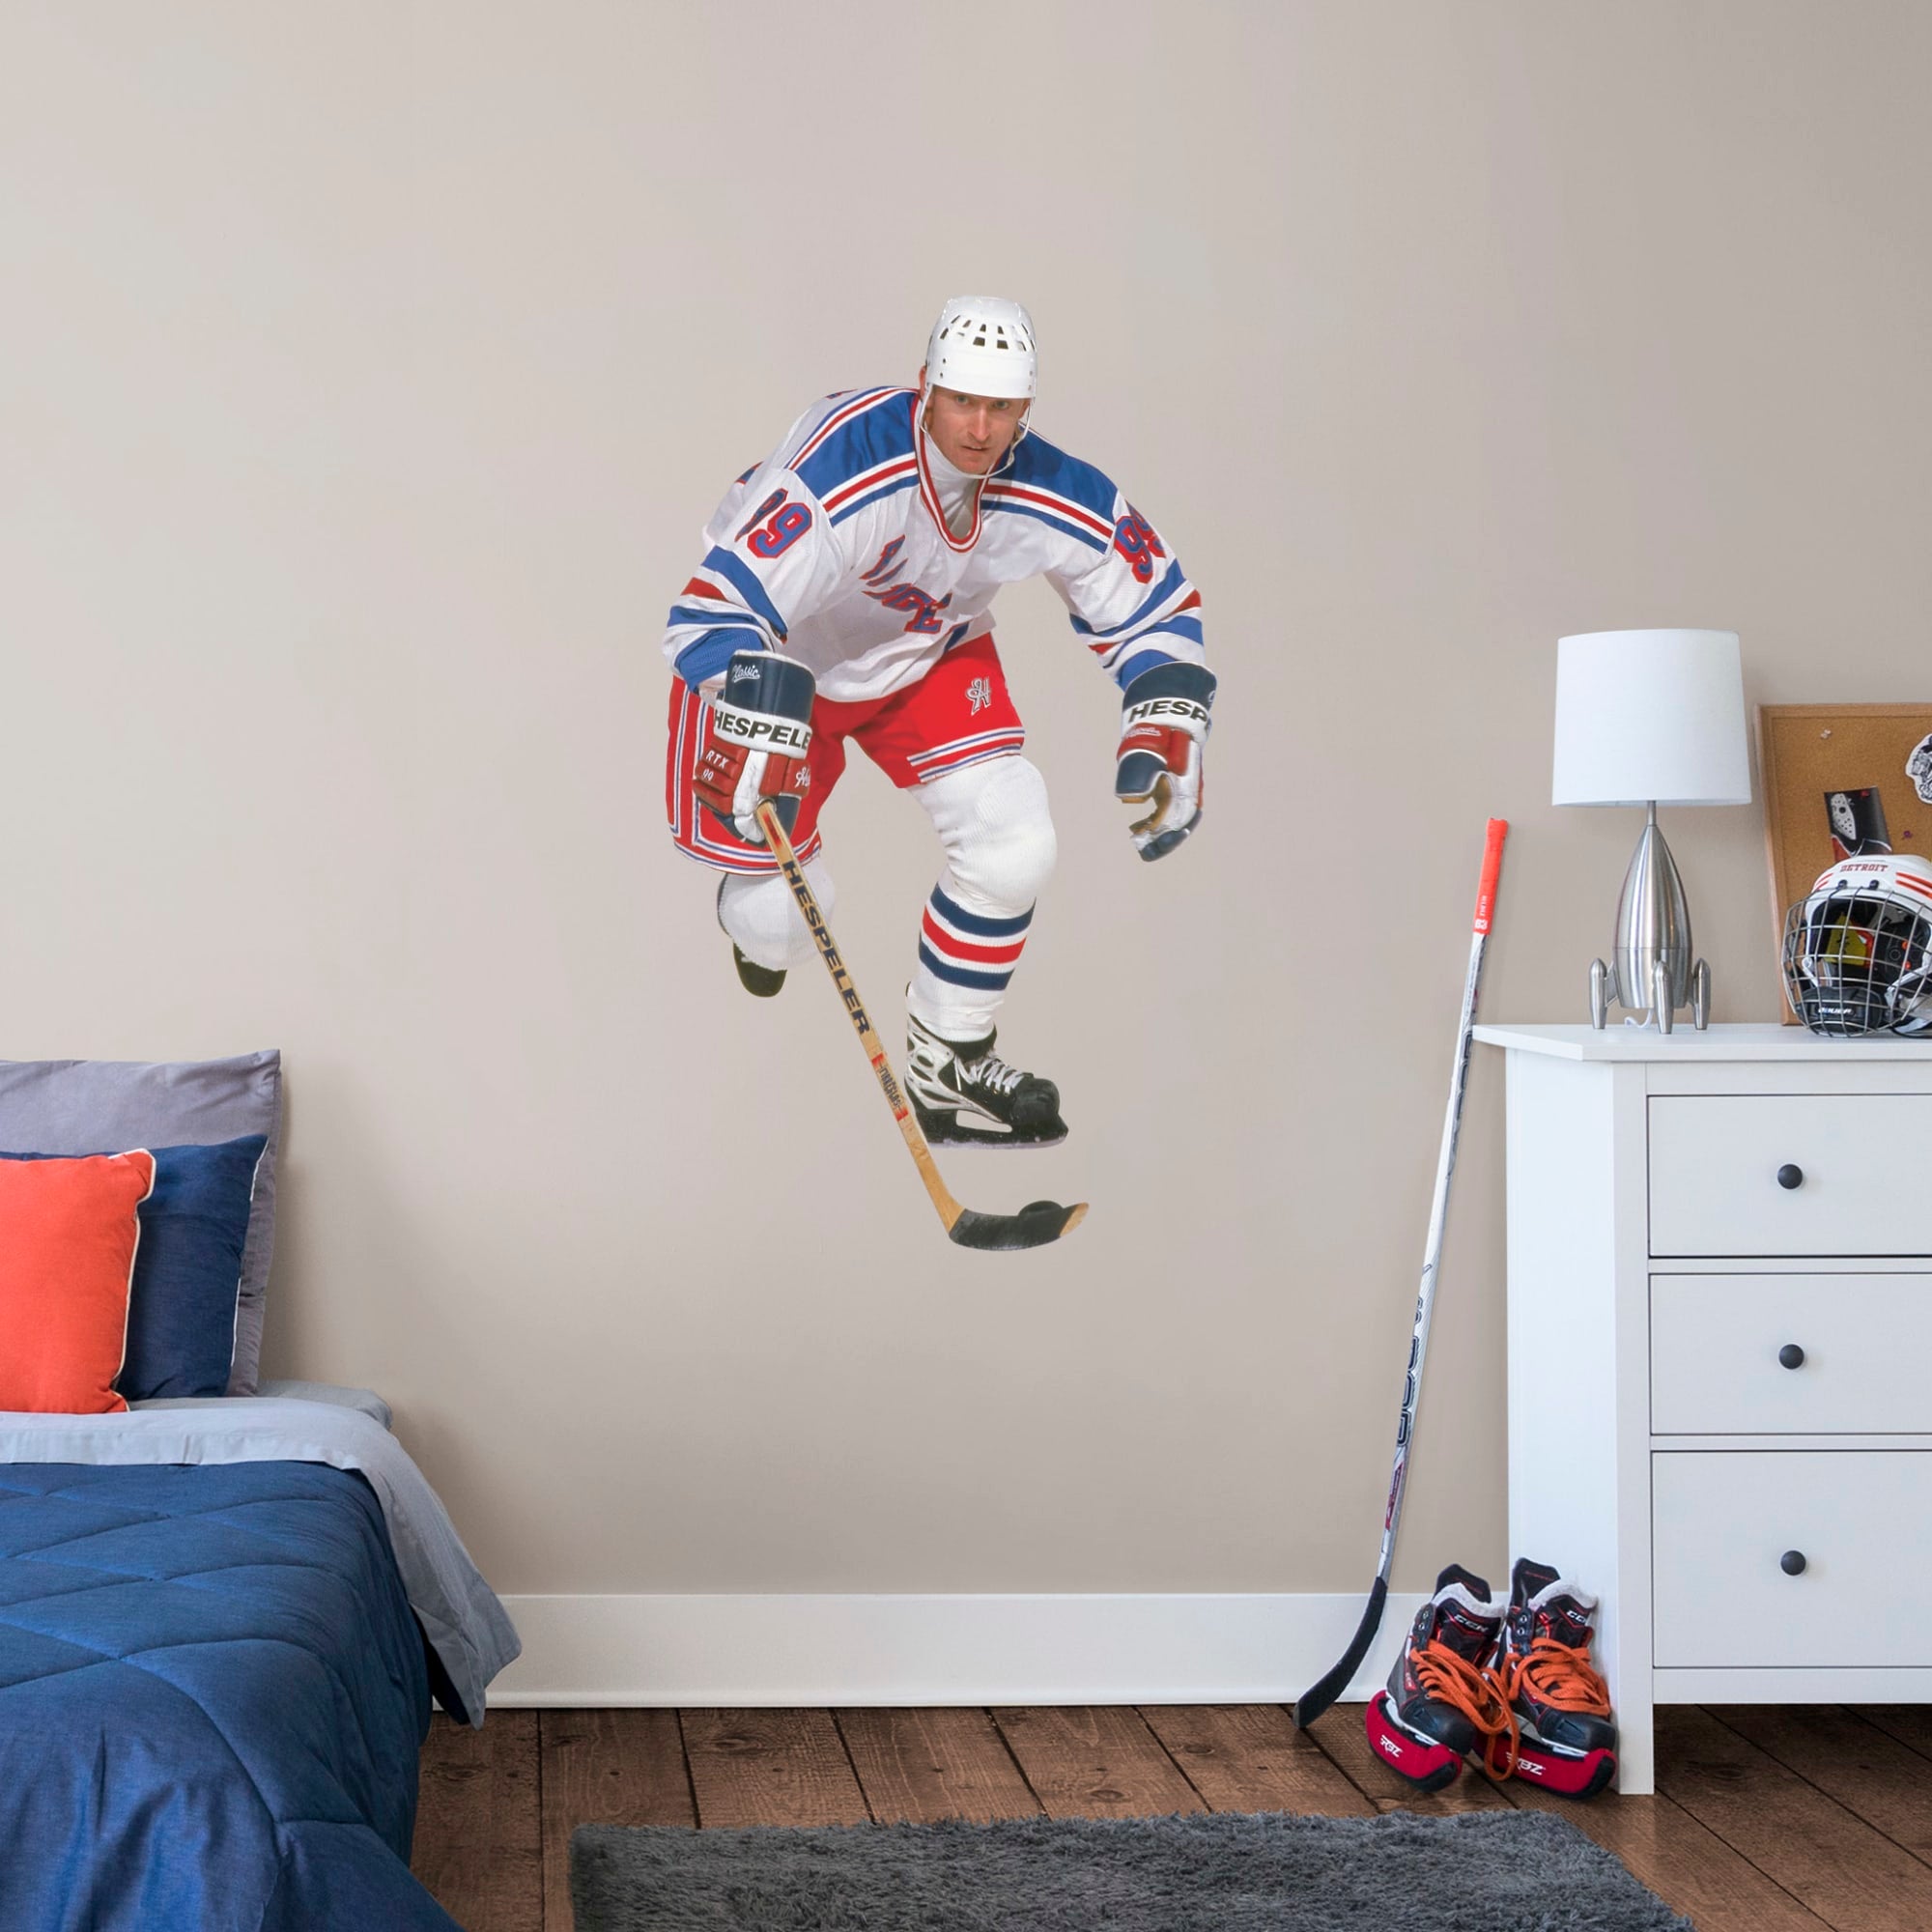 Wayne Gretzky for New York Rangers: Rangers - Officially Licensed NHL Removable Wall Decal Giant Athlete + 2 Decals (30"W x 51"H